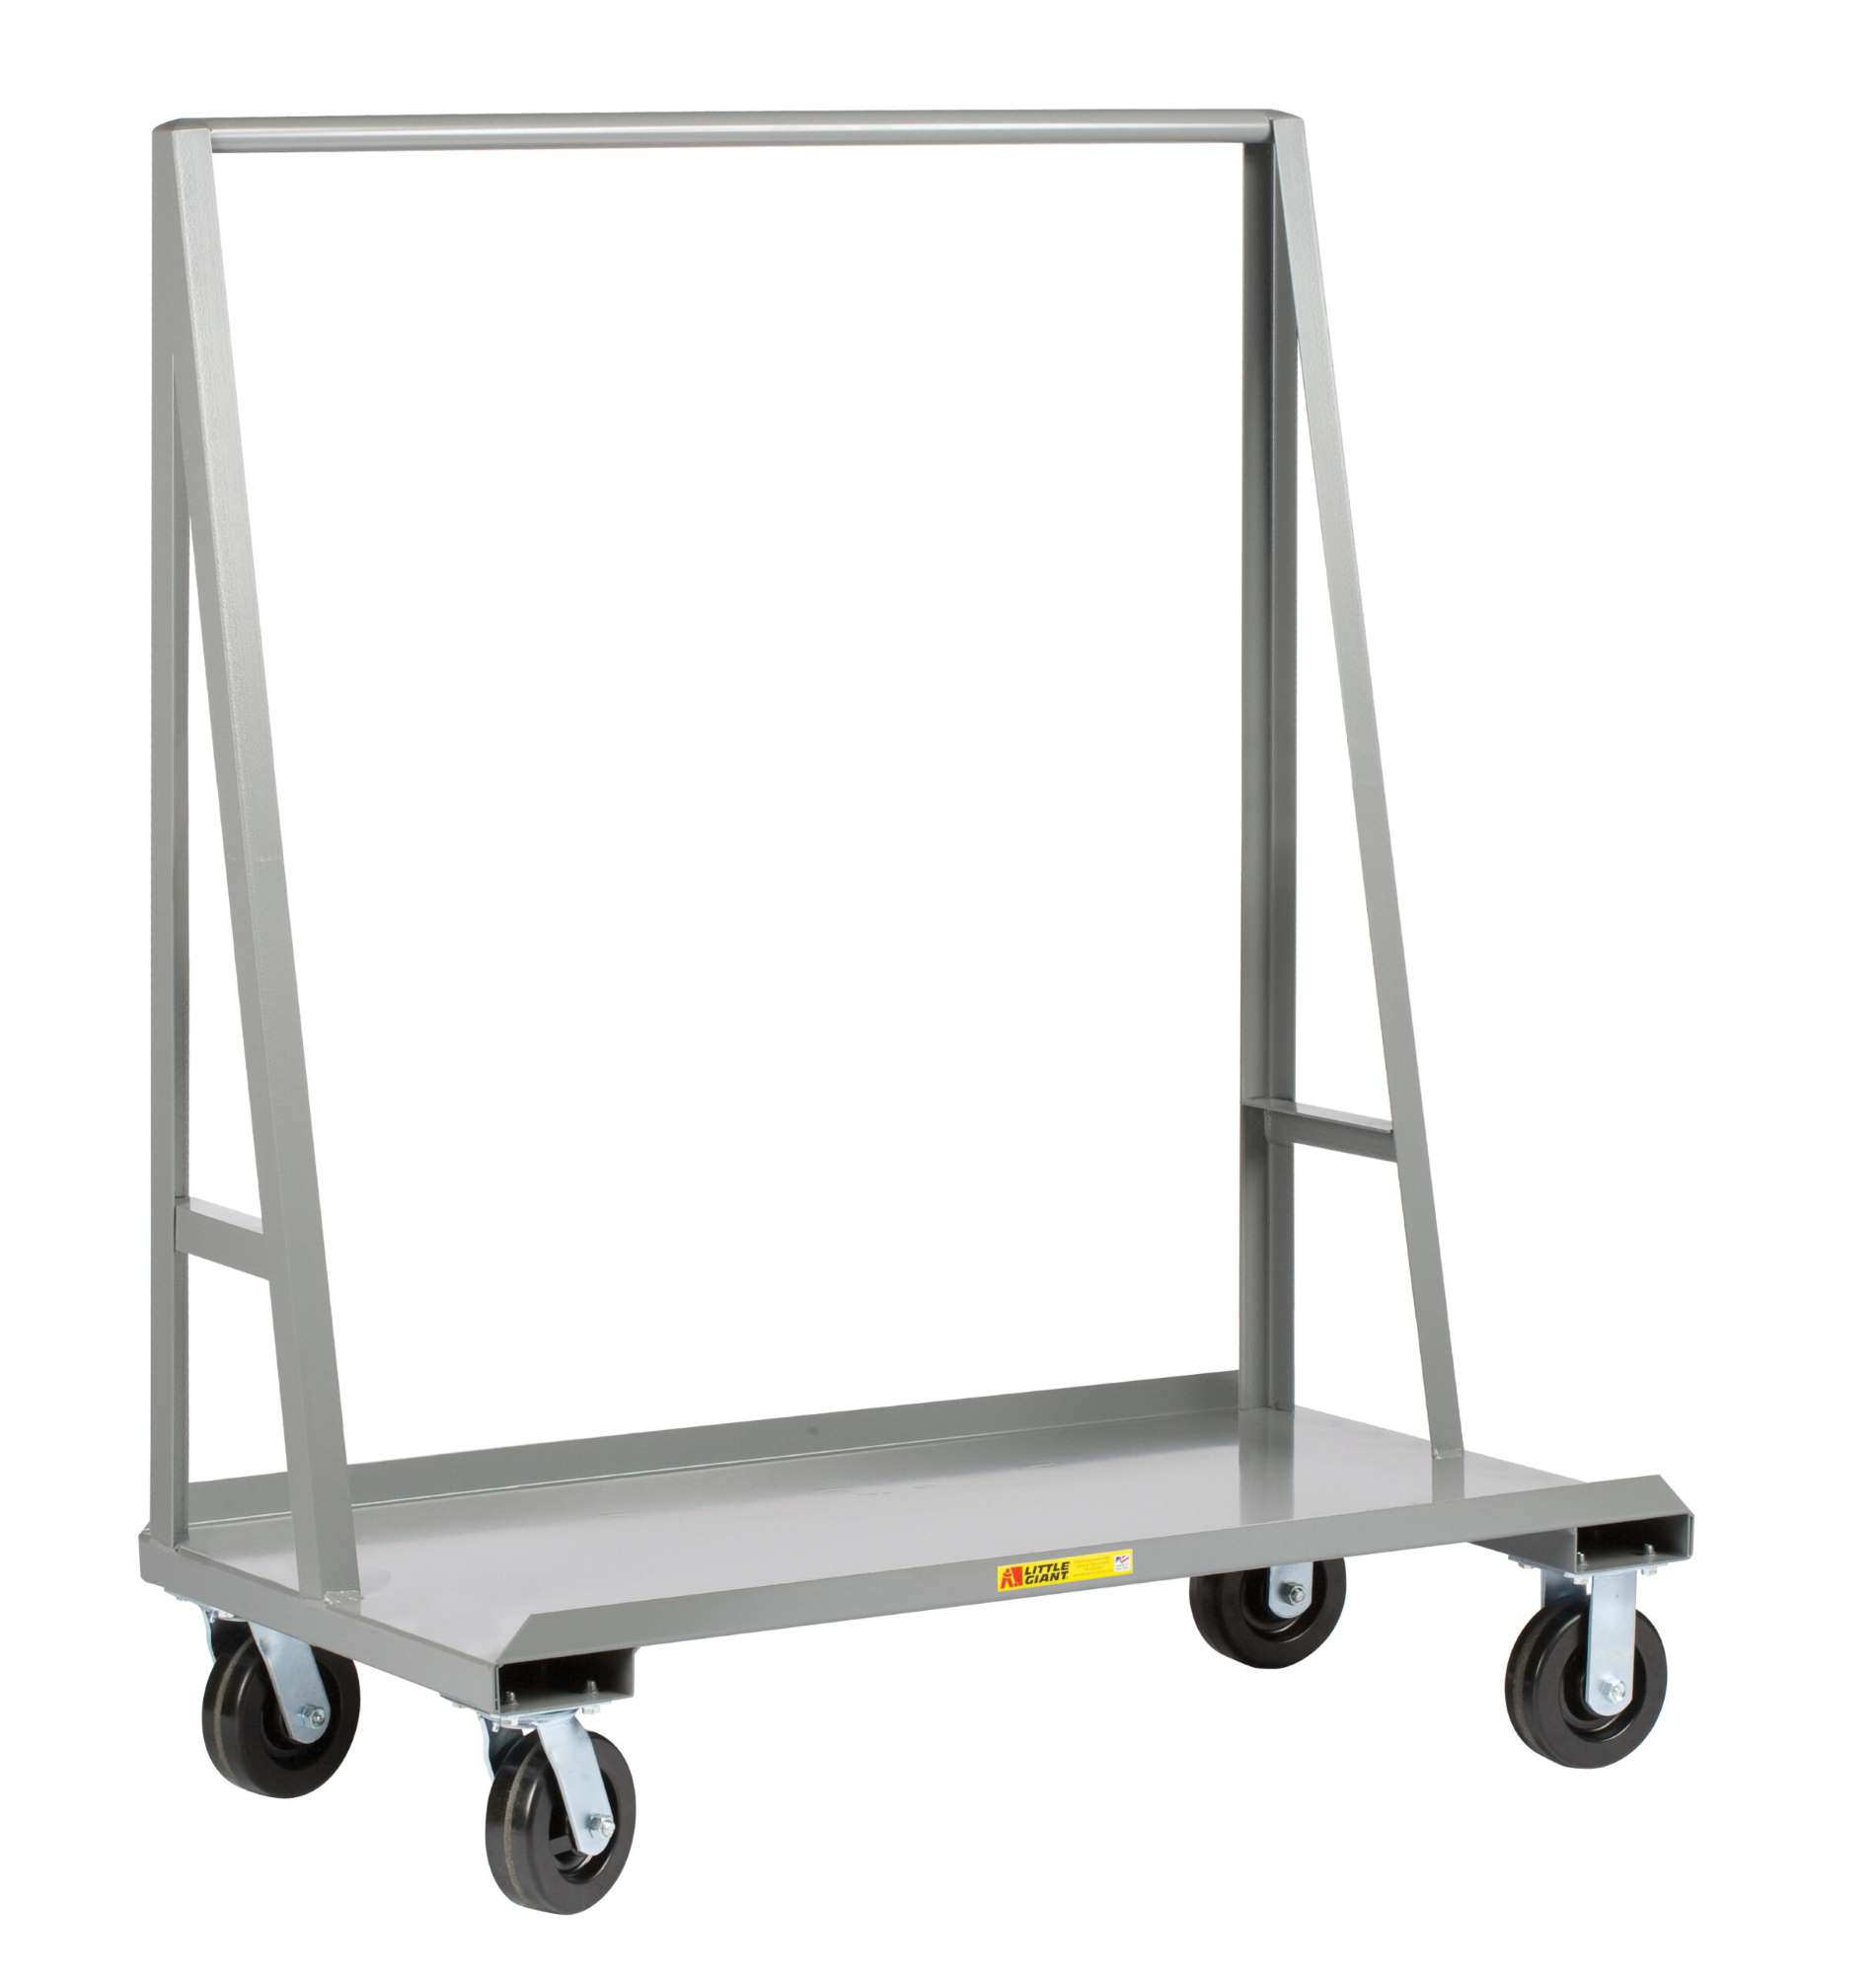 Little Giant, A-frame sheet & panel truck, 3600 lbs capacity, 12ga deck, 1-1/2" front lip, 17-1/2" base depth, Overall height 57", 6" wheels, Available with 4 swivel casters or 2 rigid and 2 swivel, Available with floor lock